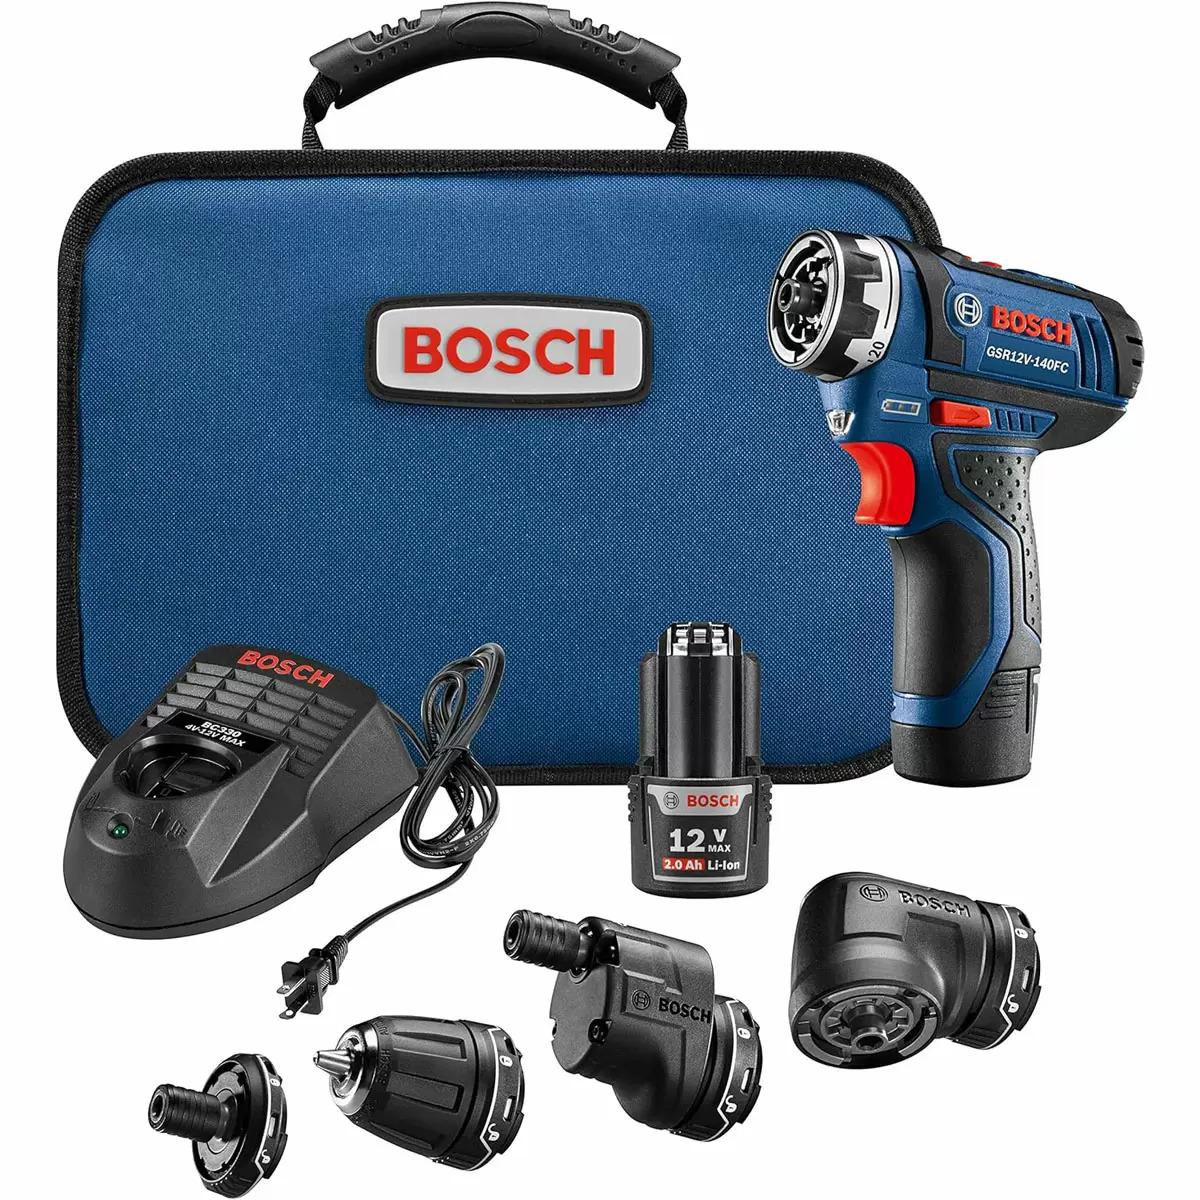 Bosch 12V Flexiclick 5-In-1 Electric Screwdriver Drill Set for $109.04 Shipped